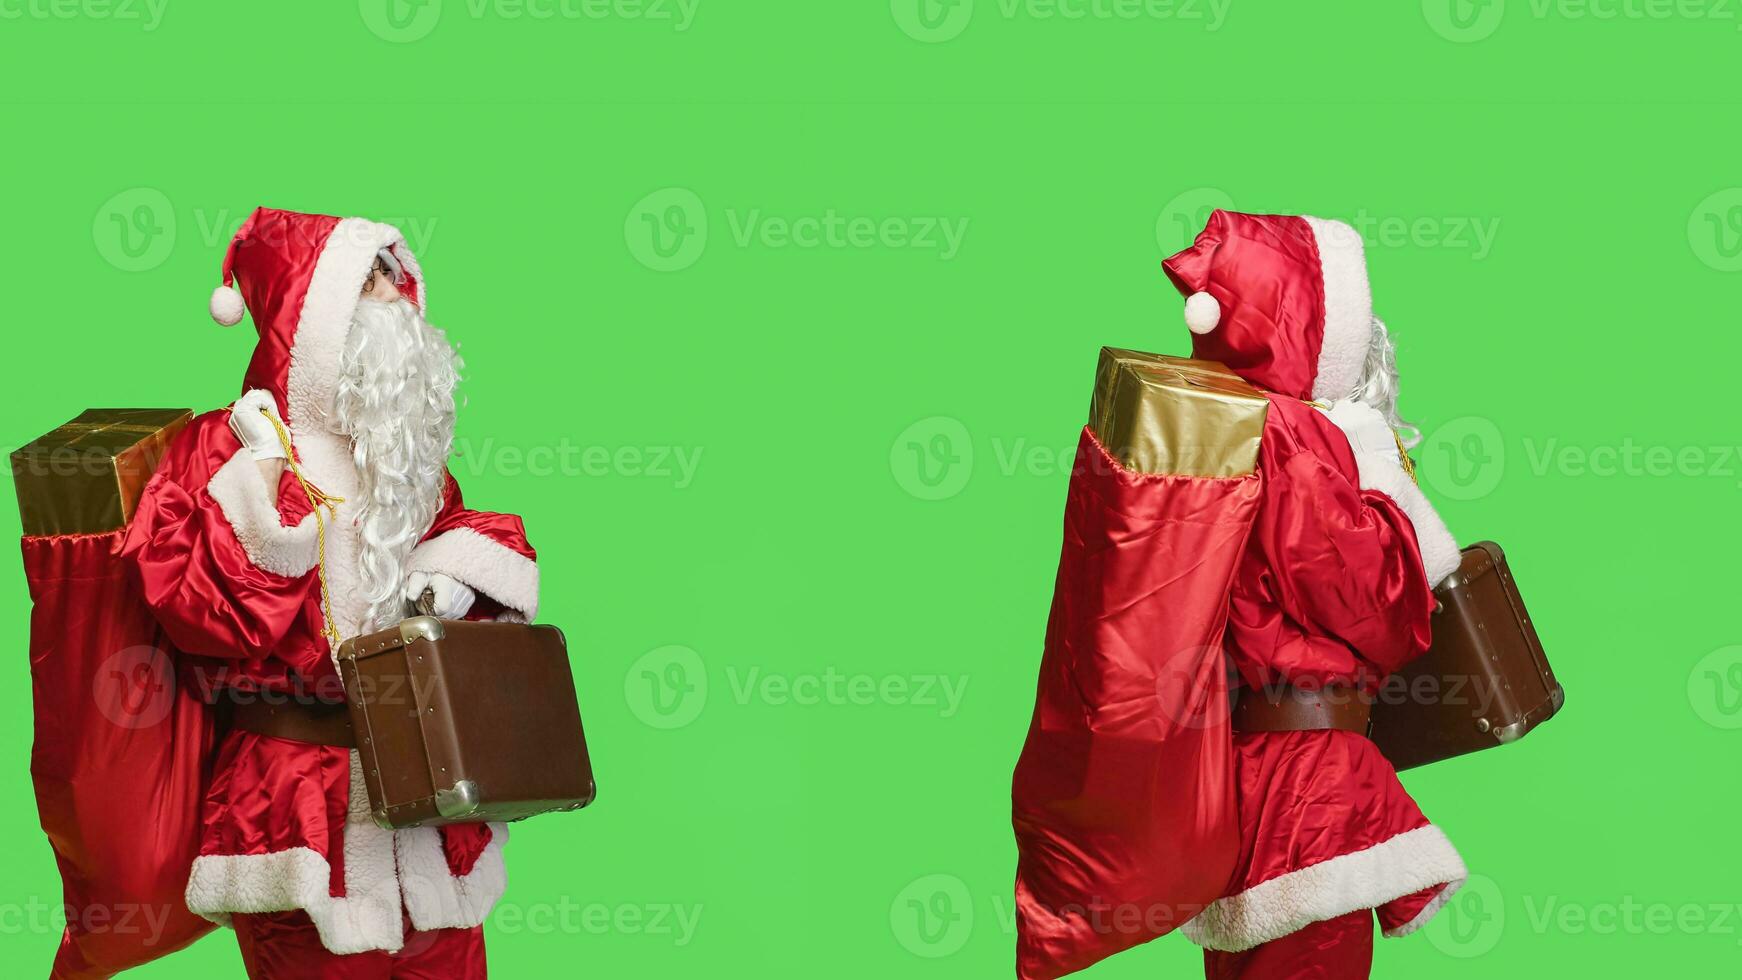 Joyful adult disguised in santa suit holding suitcase and waiting for something in studio with greenscreen backdrop. Positive person carrying briefcase during holiday season celebration. photo